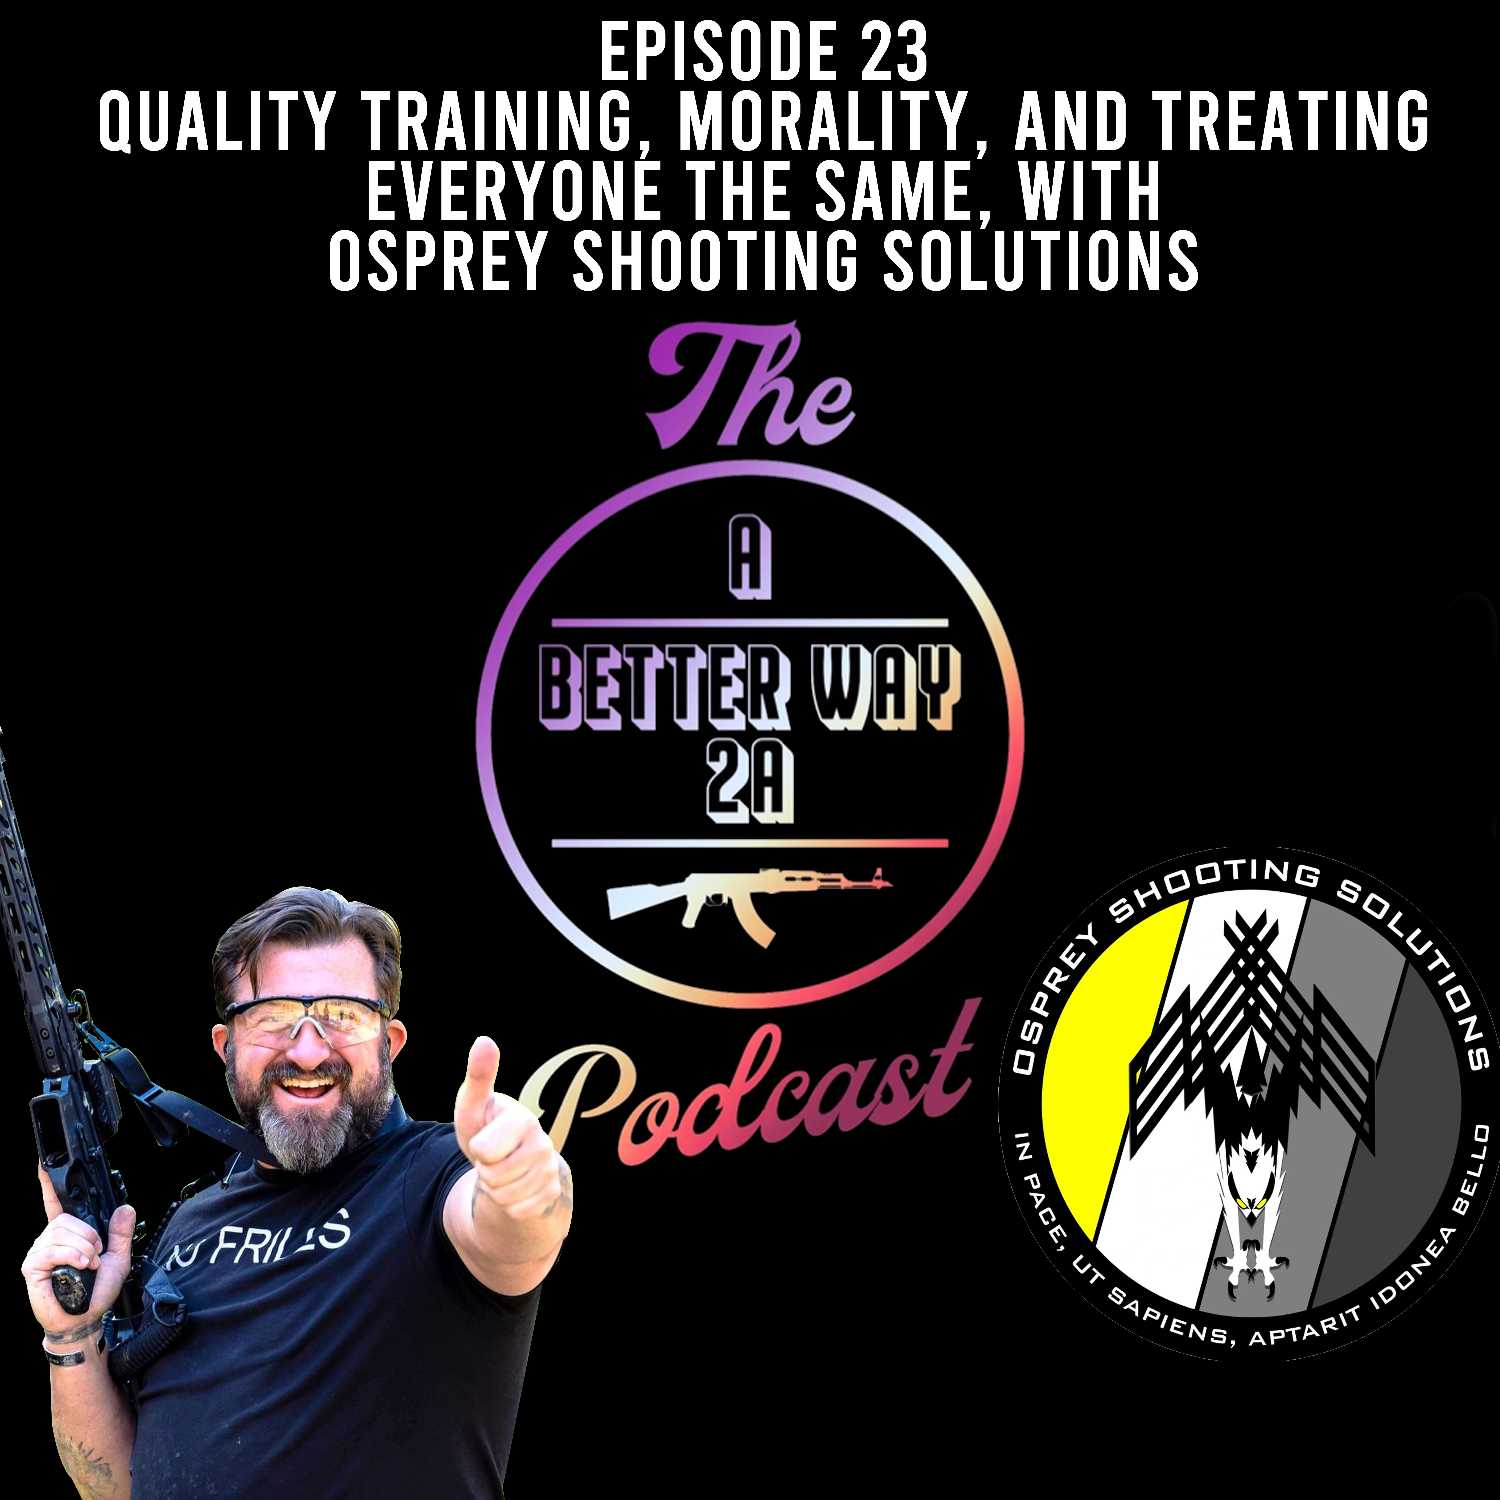 Episode 23 - Quality Training, Morality, and Treating Everyone the Same, with Osprey Shooting Solutions